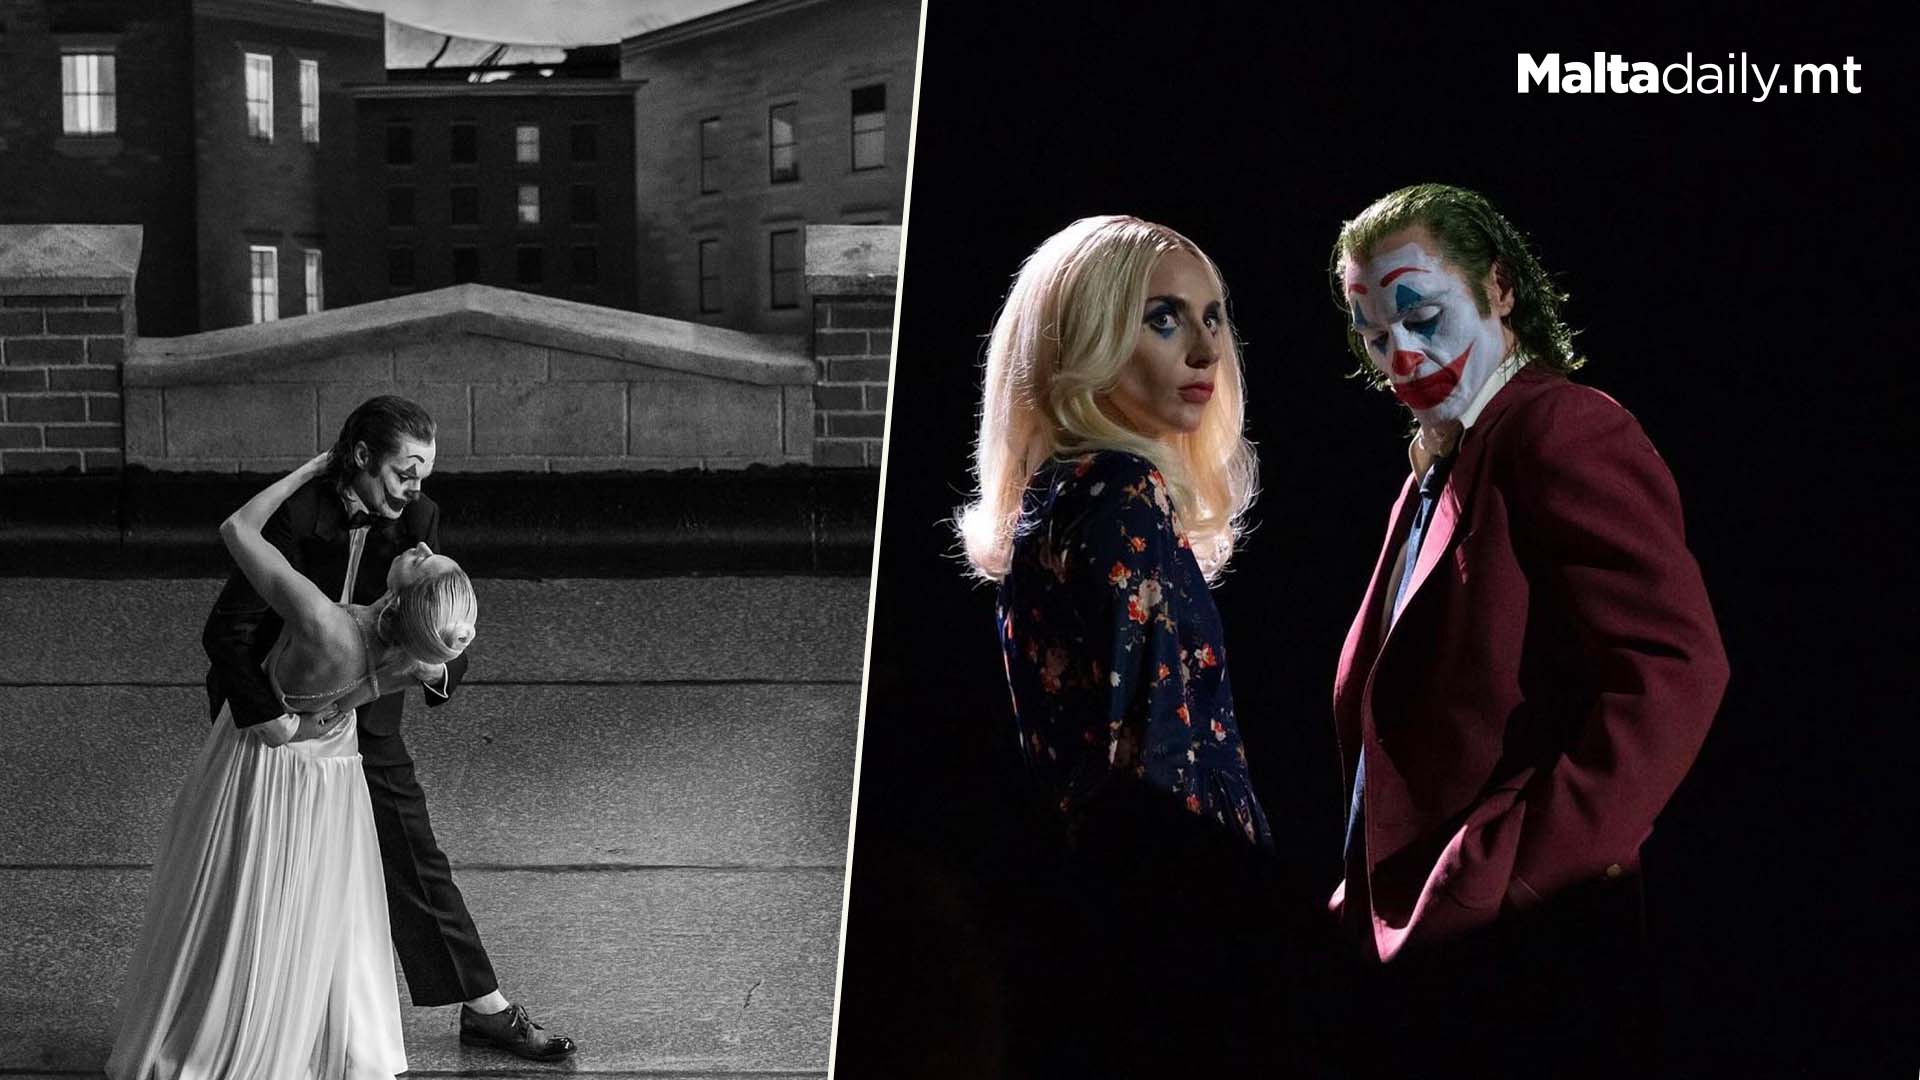 New Joker 2 Images Released By Director